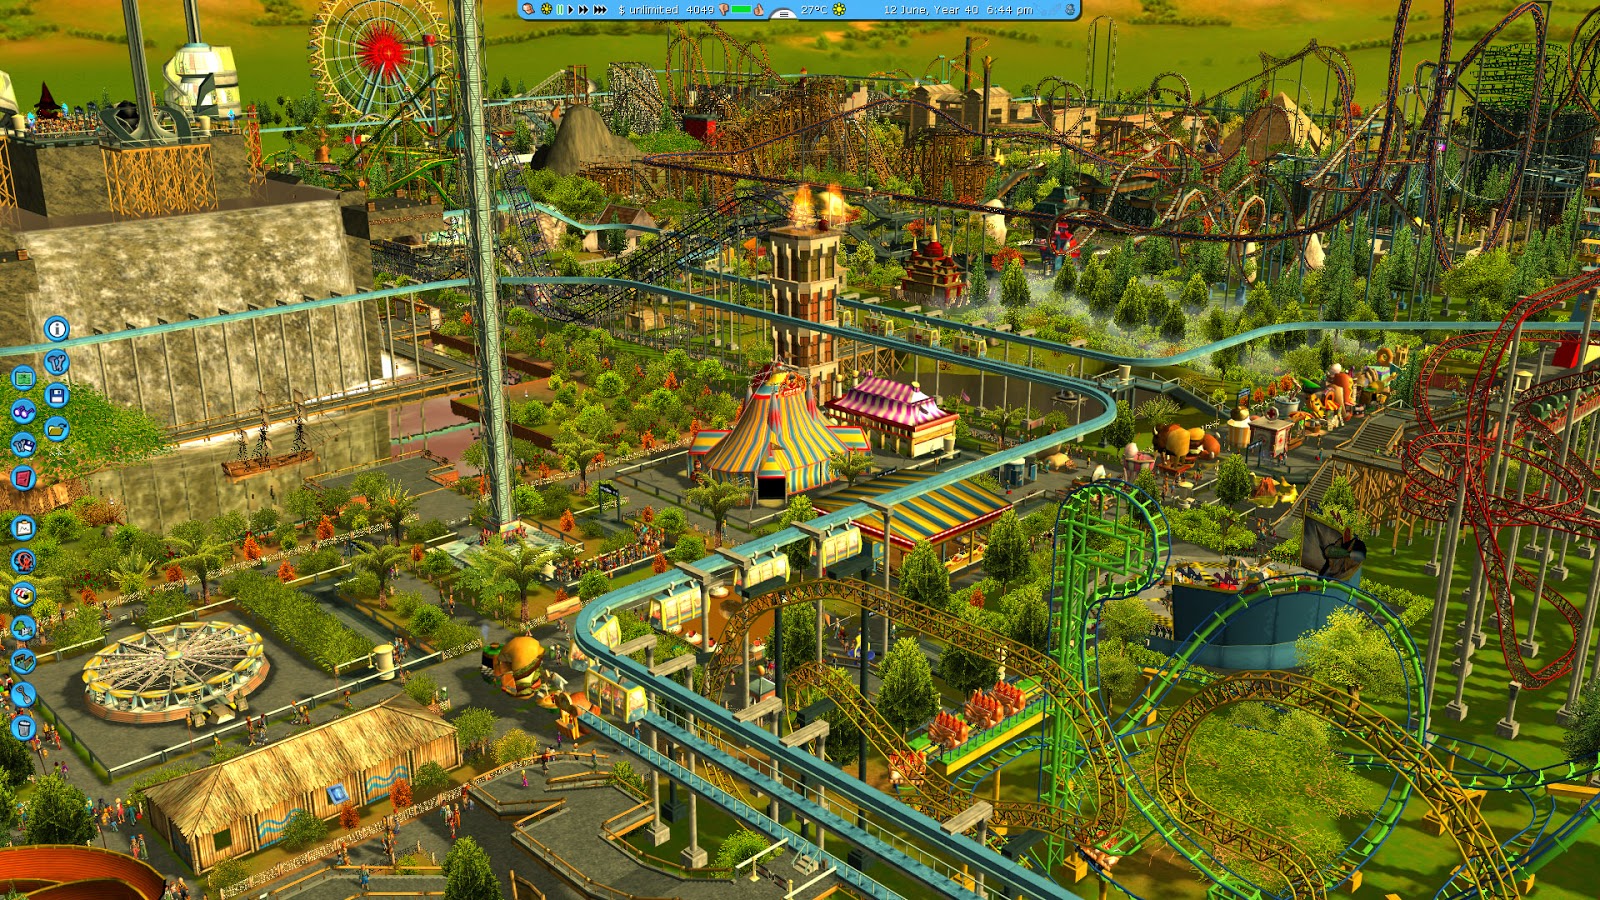 Download Roller Coaster Tycoon 2 For Mac Free